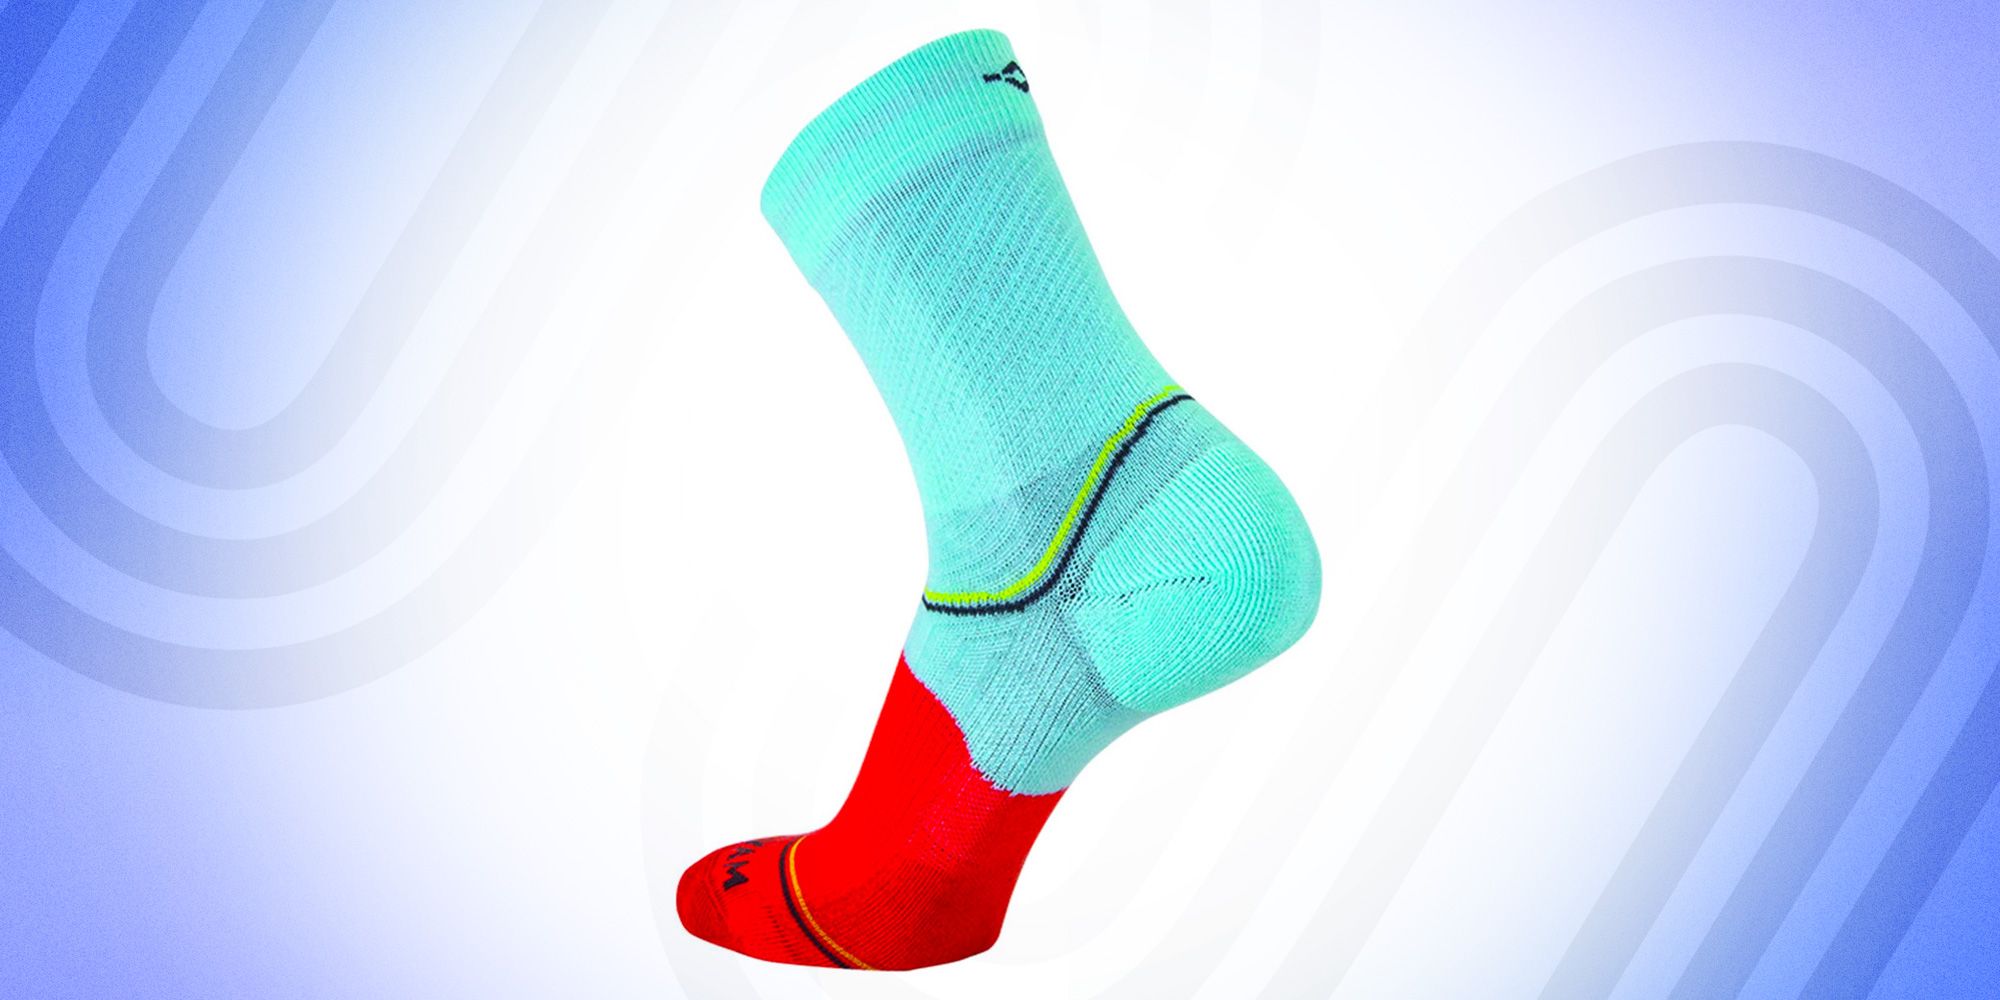 Choosing the Best Compression Socks for Travel 2022